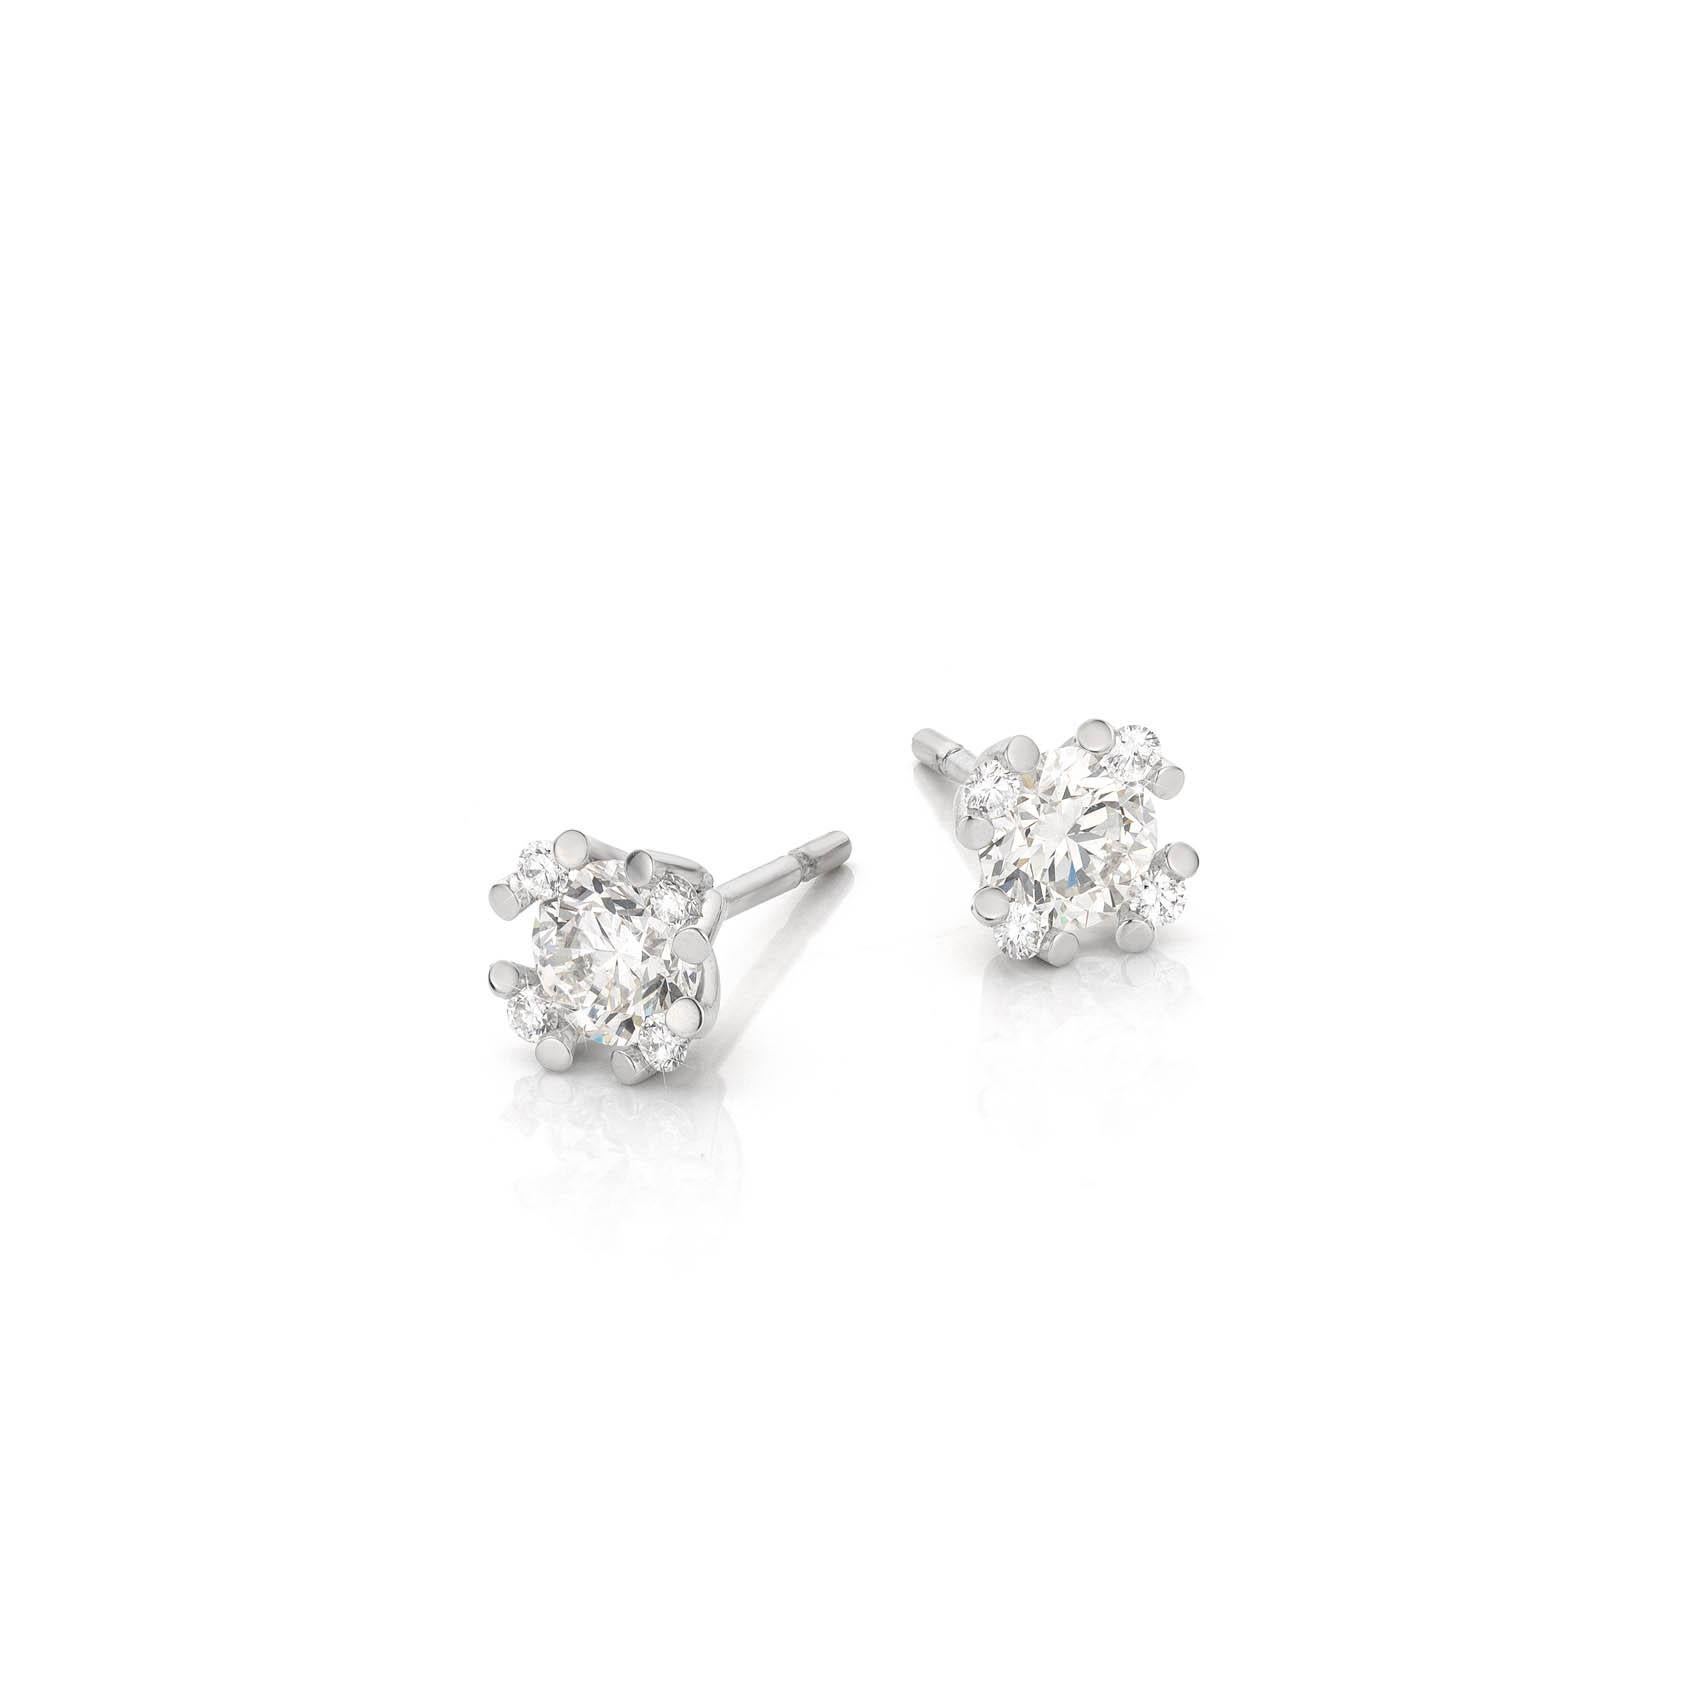 Brilliant Cut Cober “Dancing with the stars” with central 0.34 Ct Diamond Stud Earrings For Sale